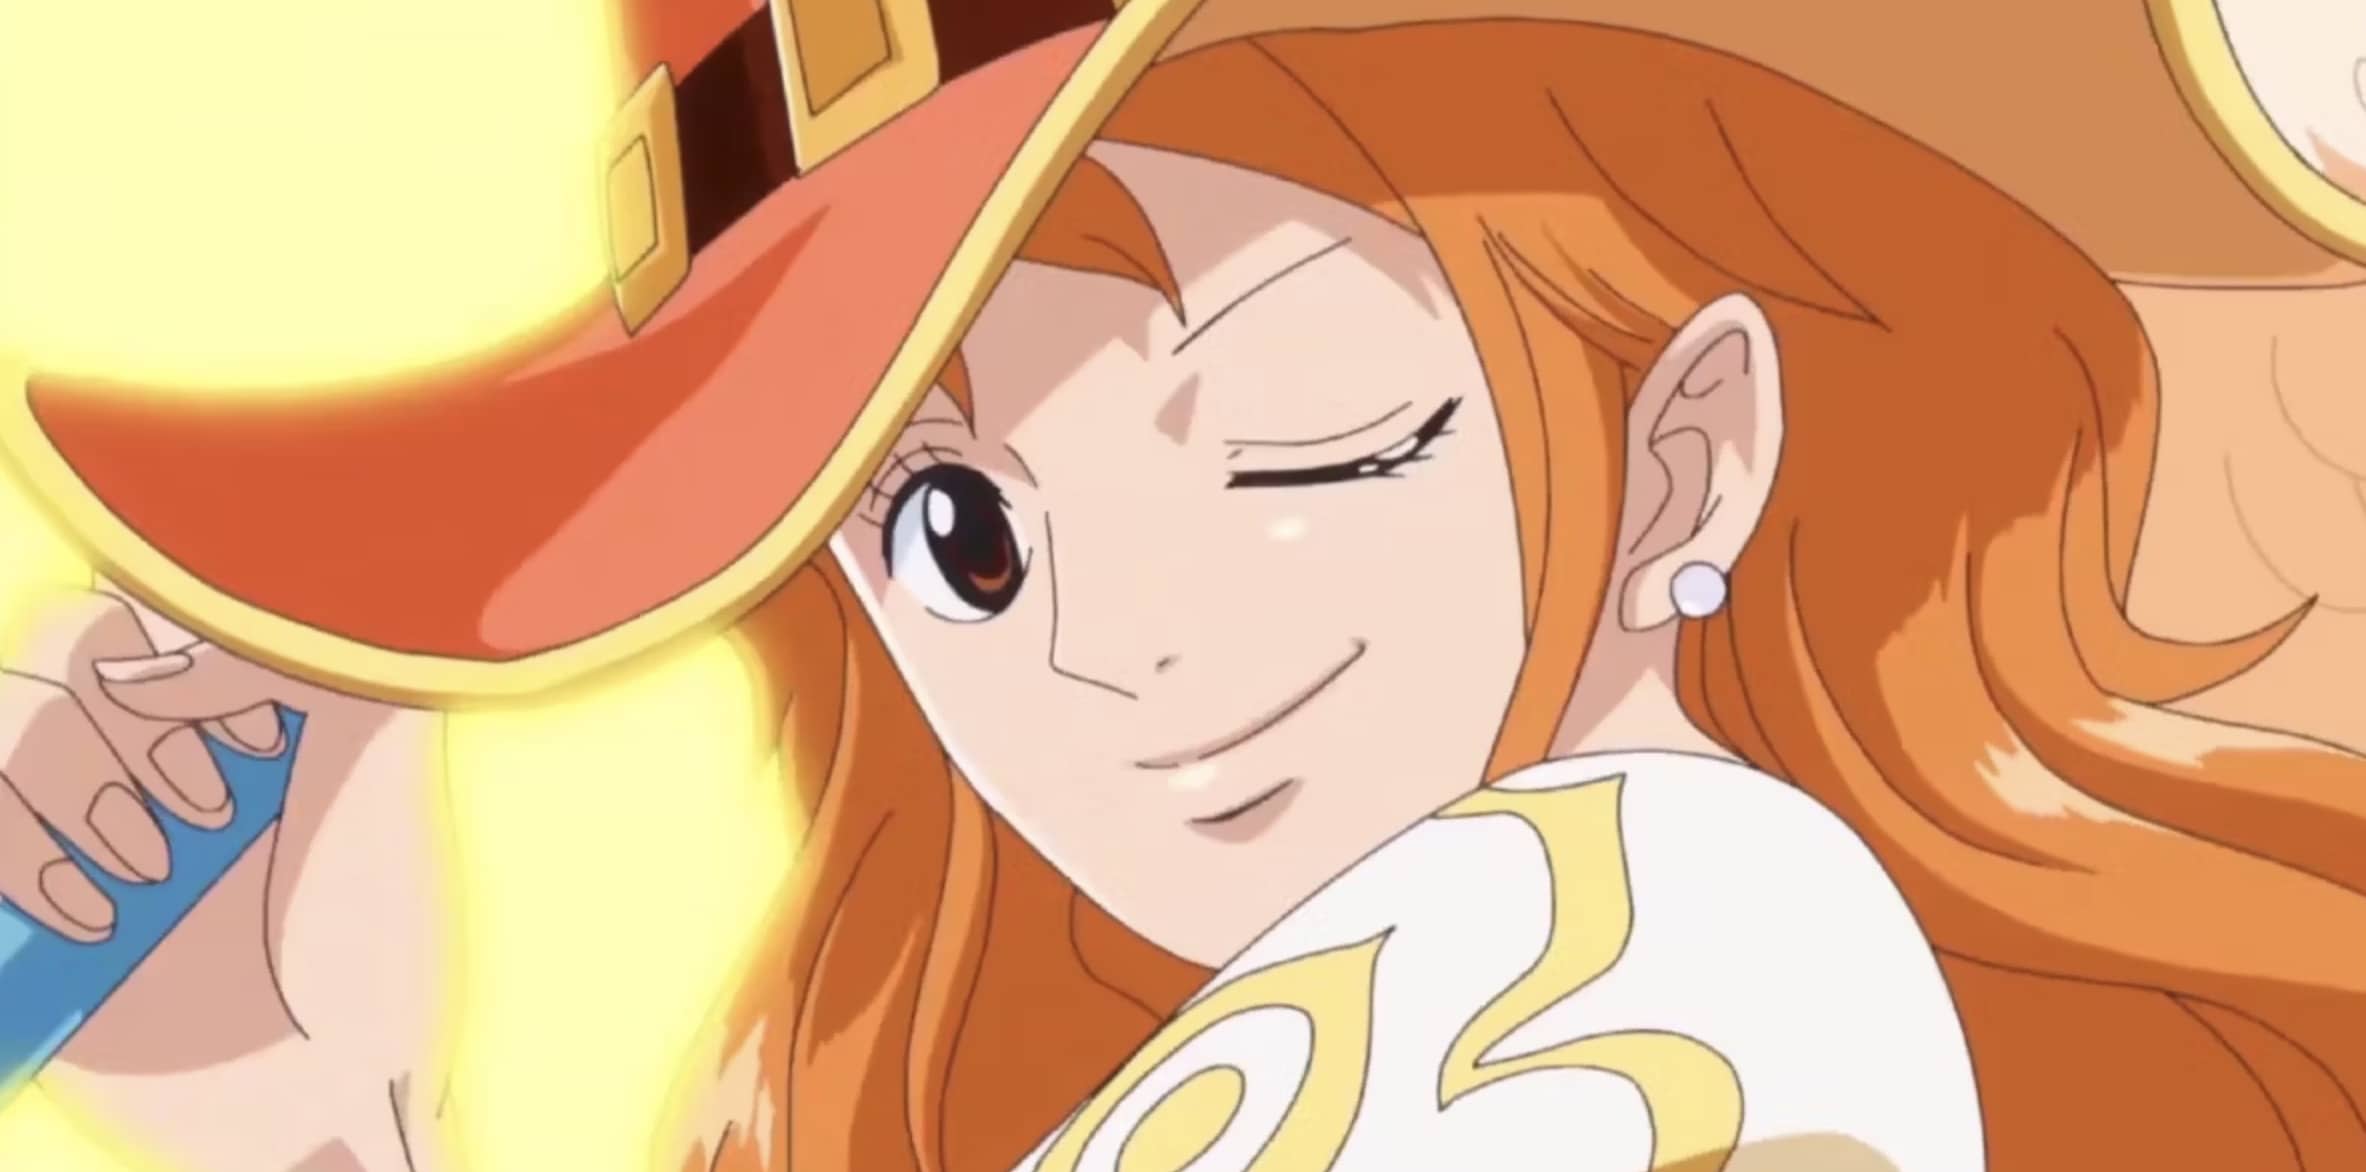 The Real Reason Why Nami Wears Revealing Outfits